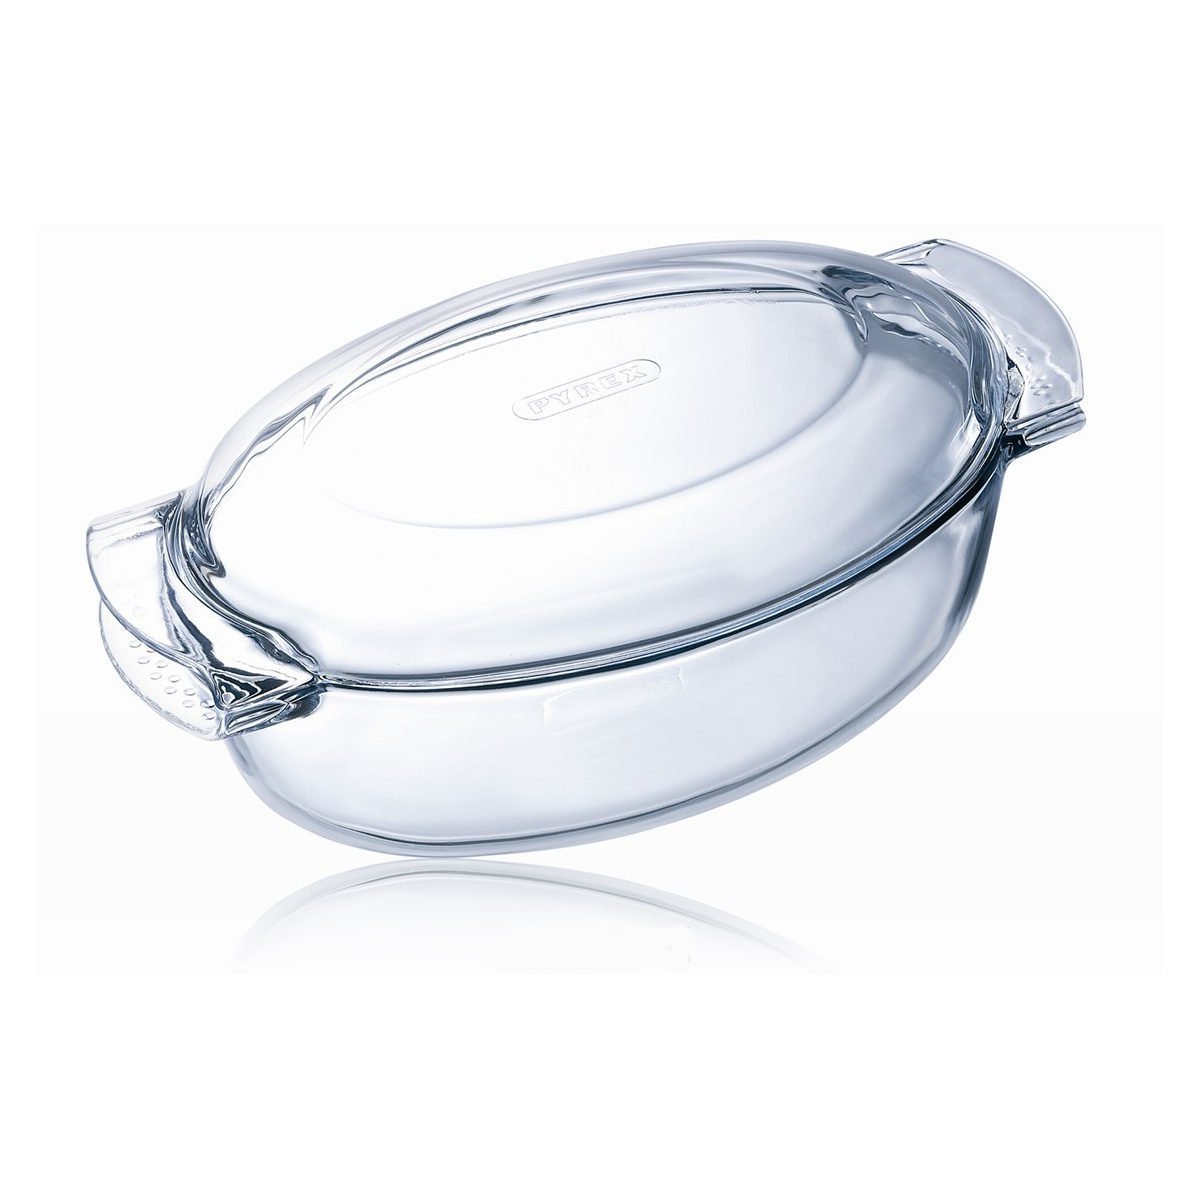 фото Гусятница pyrex 4,5 л